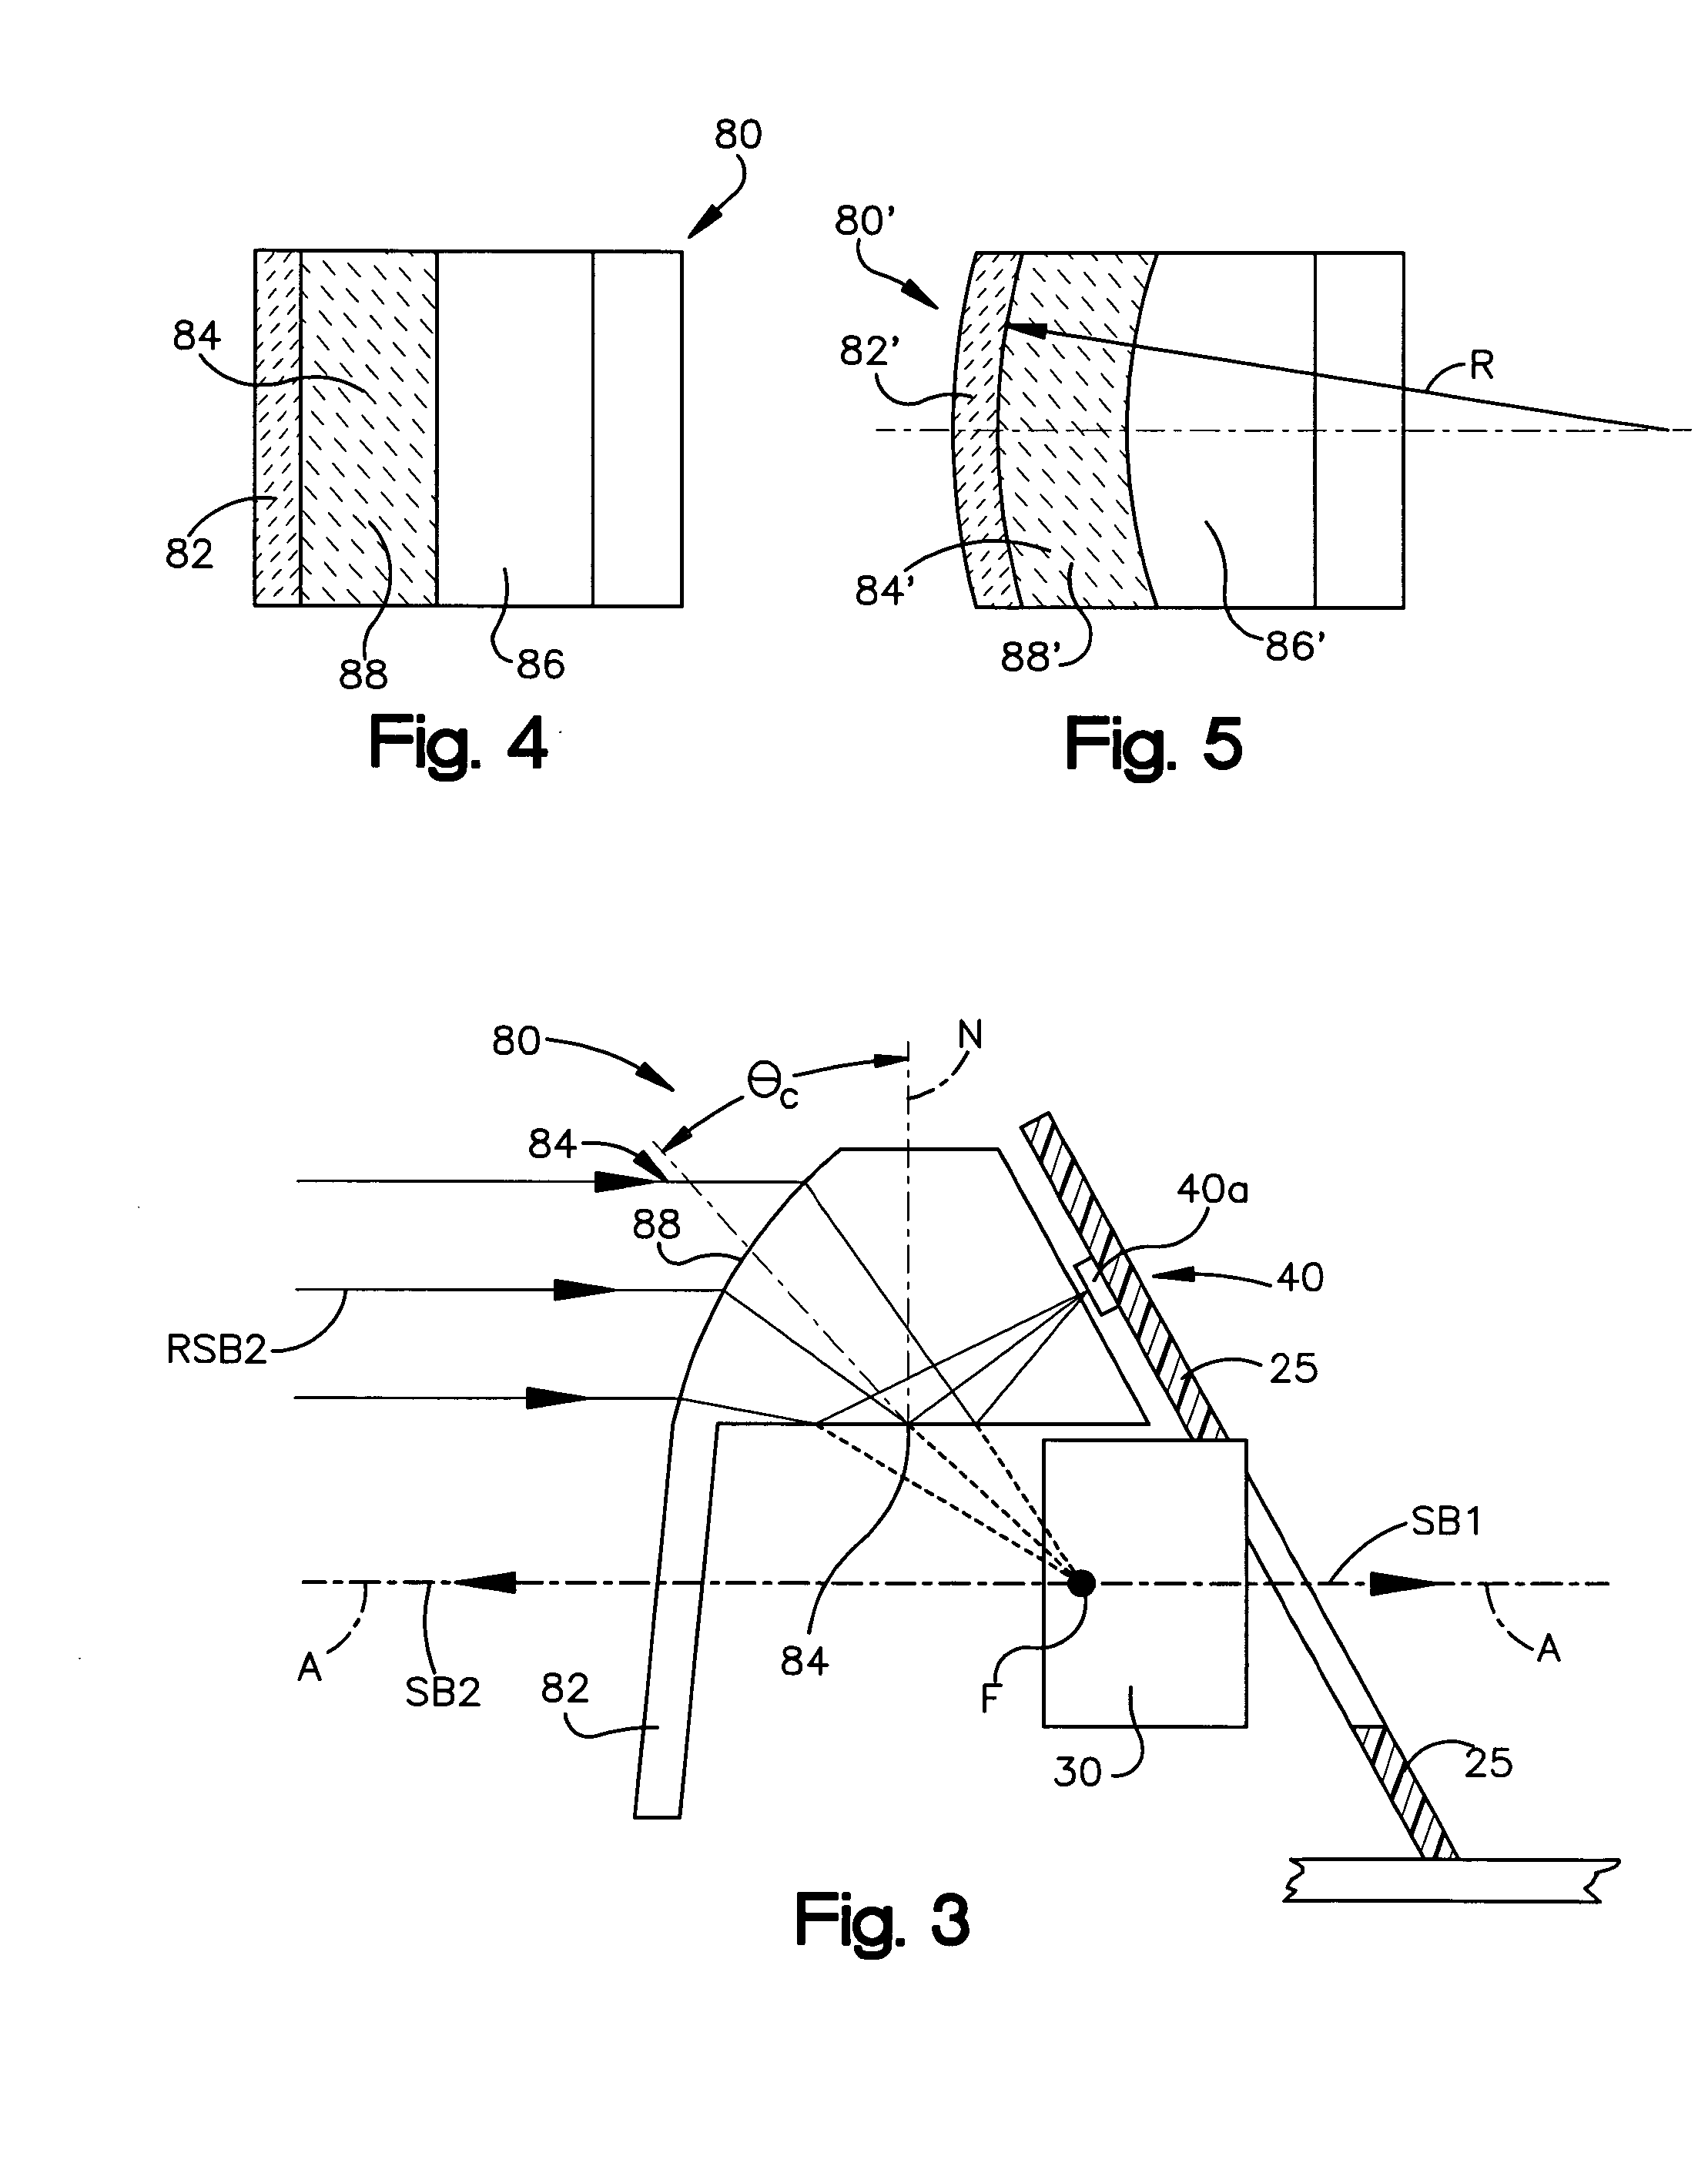 Electro-optical scanner having exit window with light collecting optics